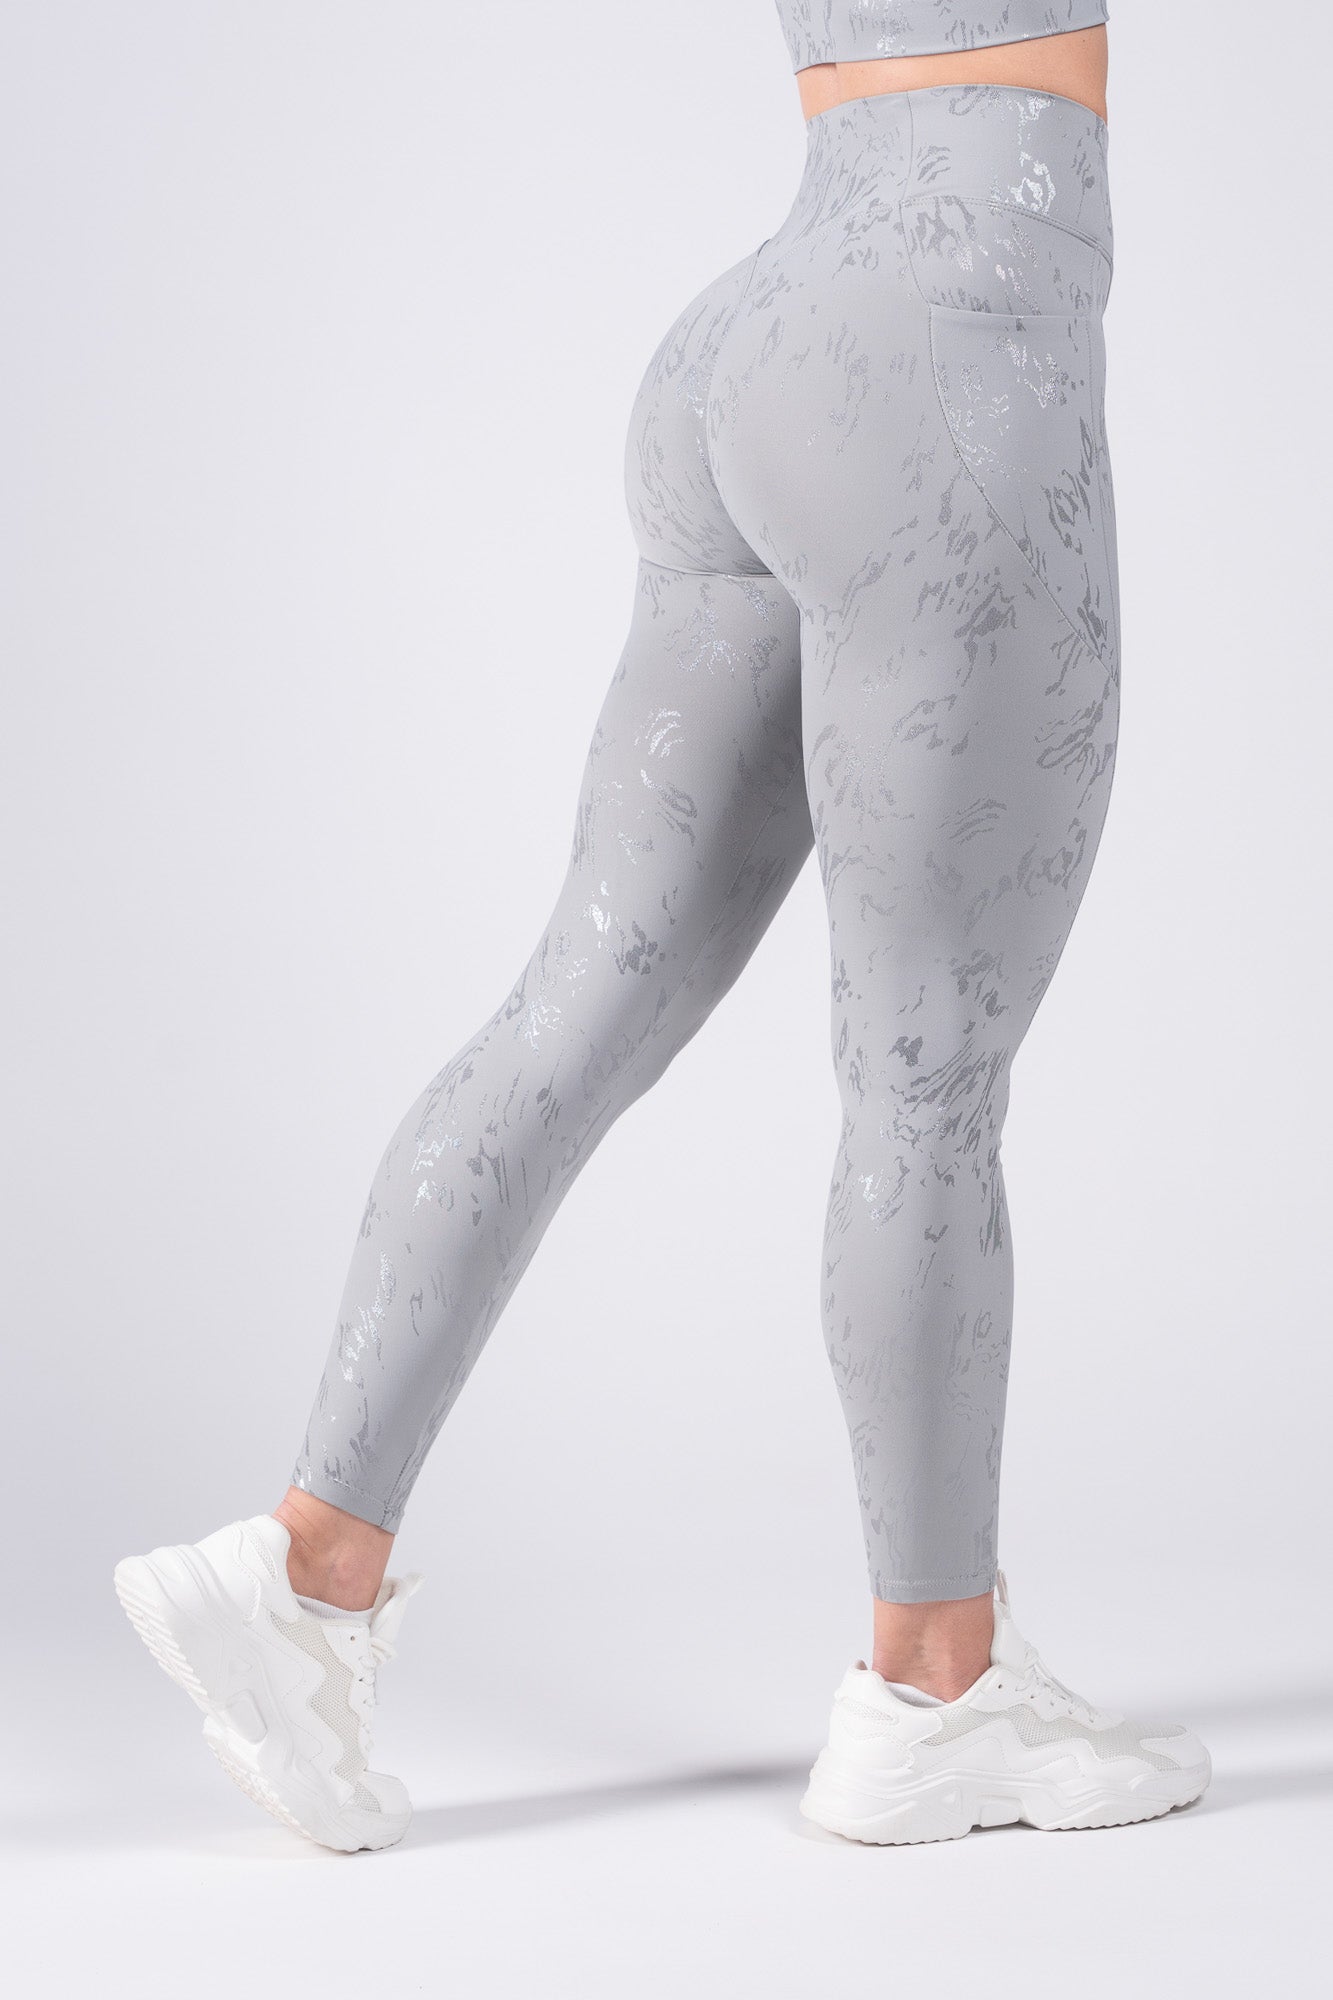 LEGGINGS SECOND SKIN - LIMITLESS EDITION